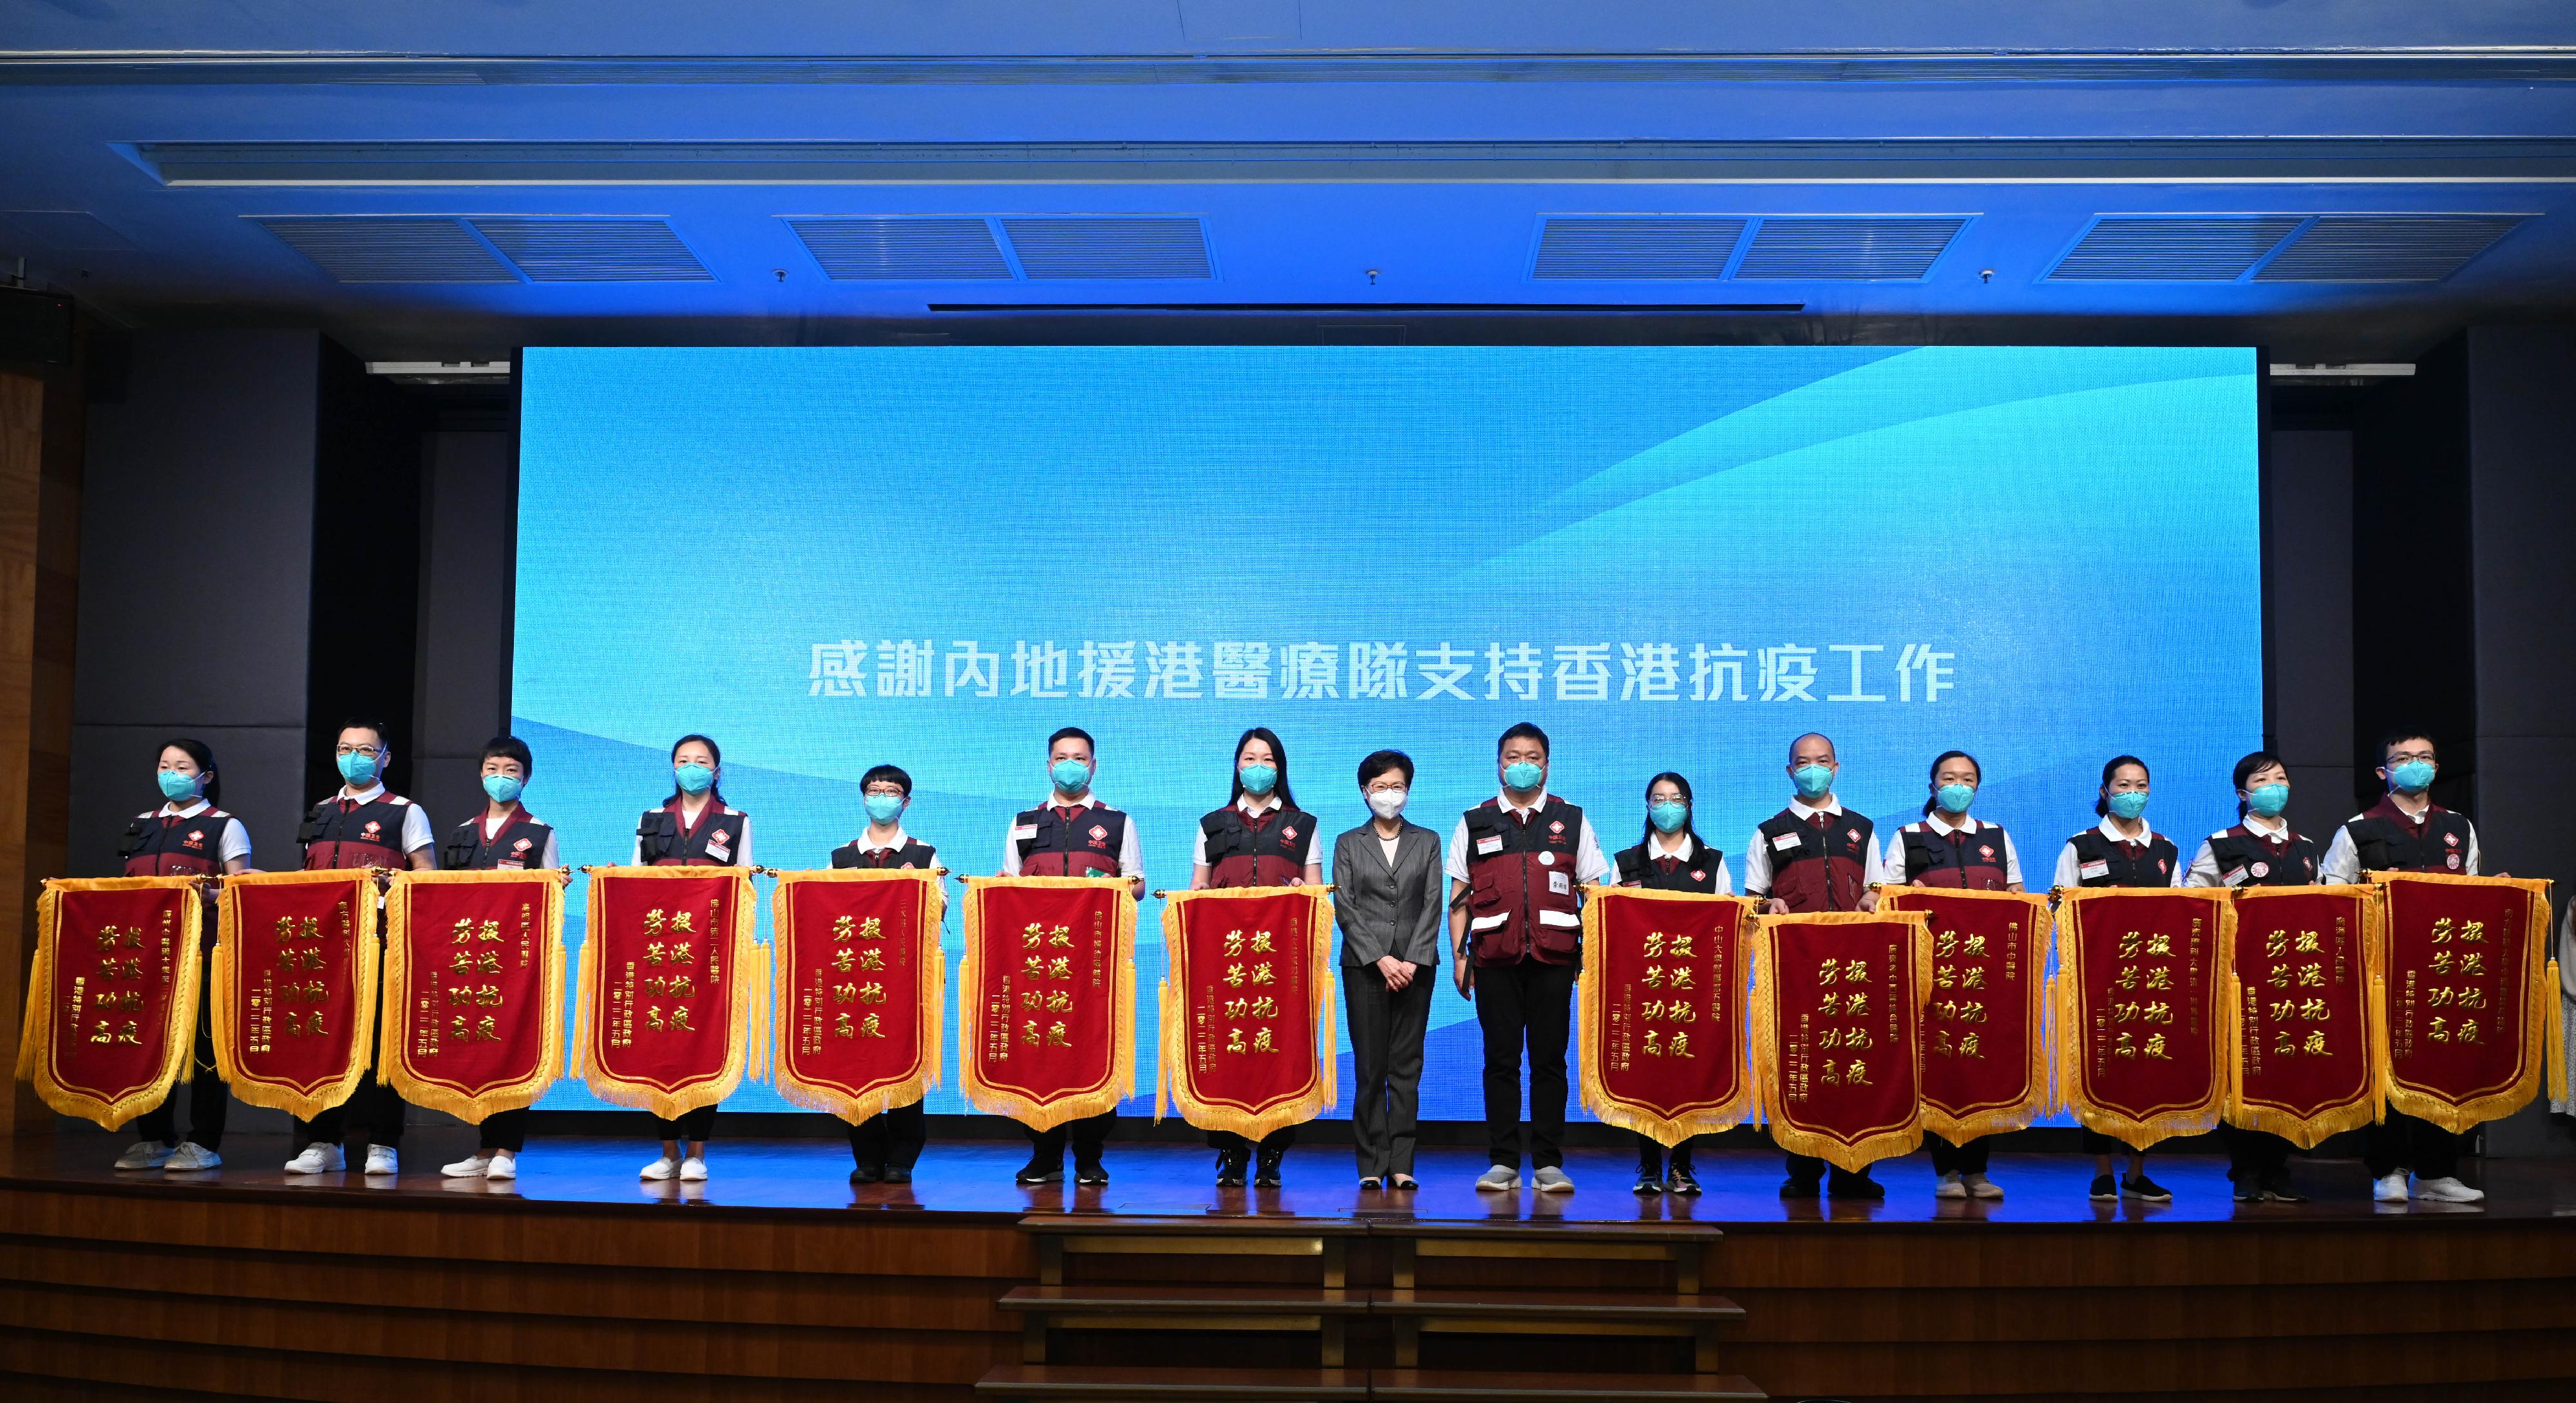 The Chief Executive, Mrs Carrie Lam, attended the appreciation and farewell ceremony held by the Hong Kong Special Administrative Region Government for the Mainland medical support team this afternoon (May 5). Photo shows Mrs Lam (centre) presenting memorial flags to representatives of the Mainland medical support team.